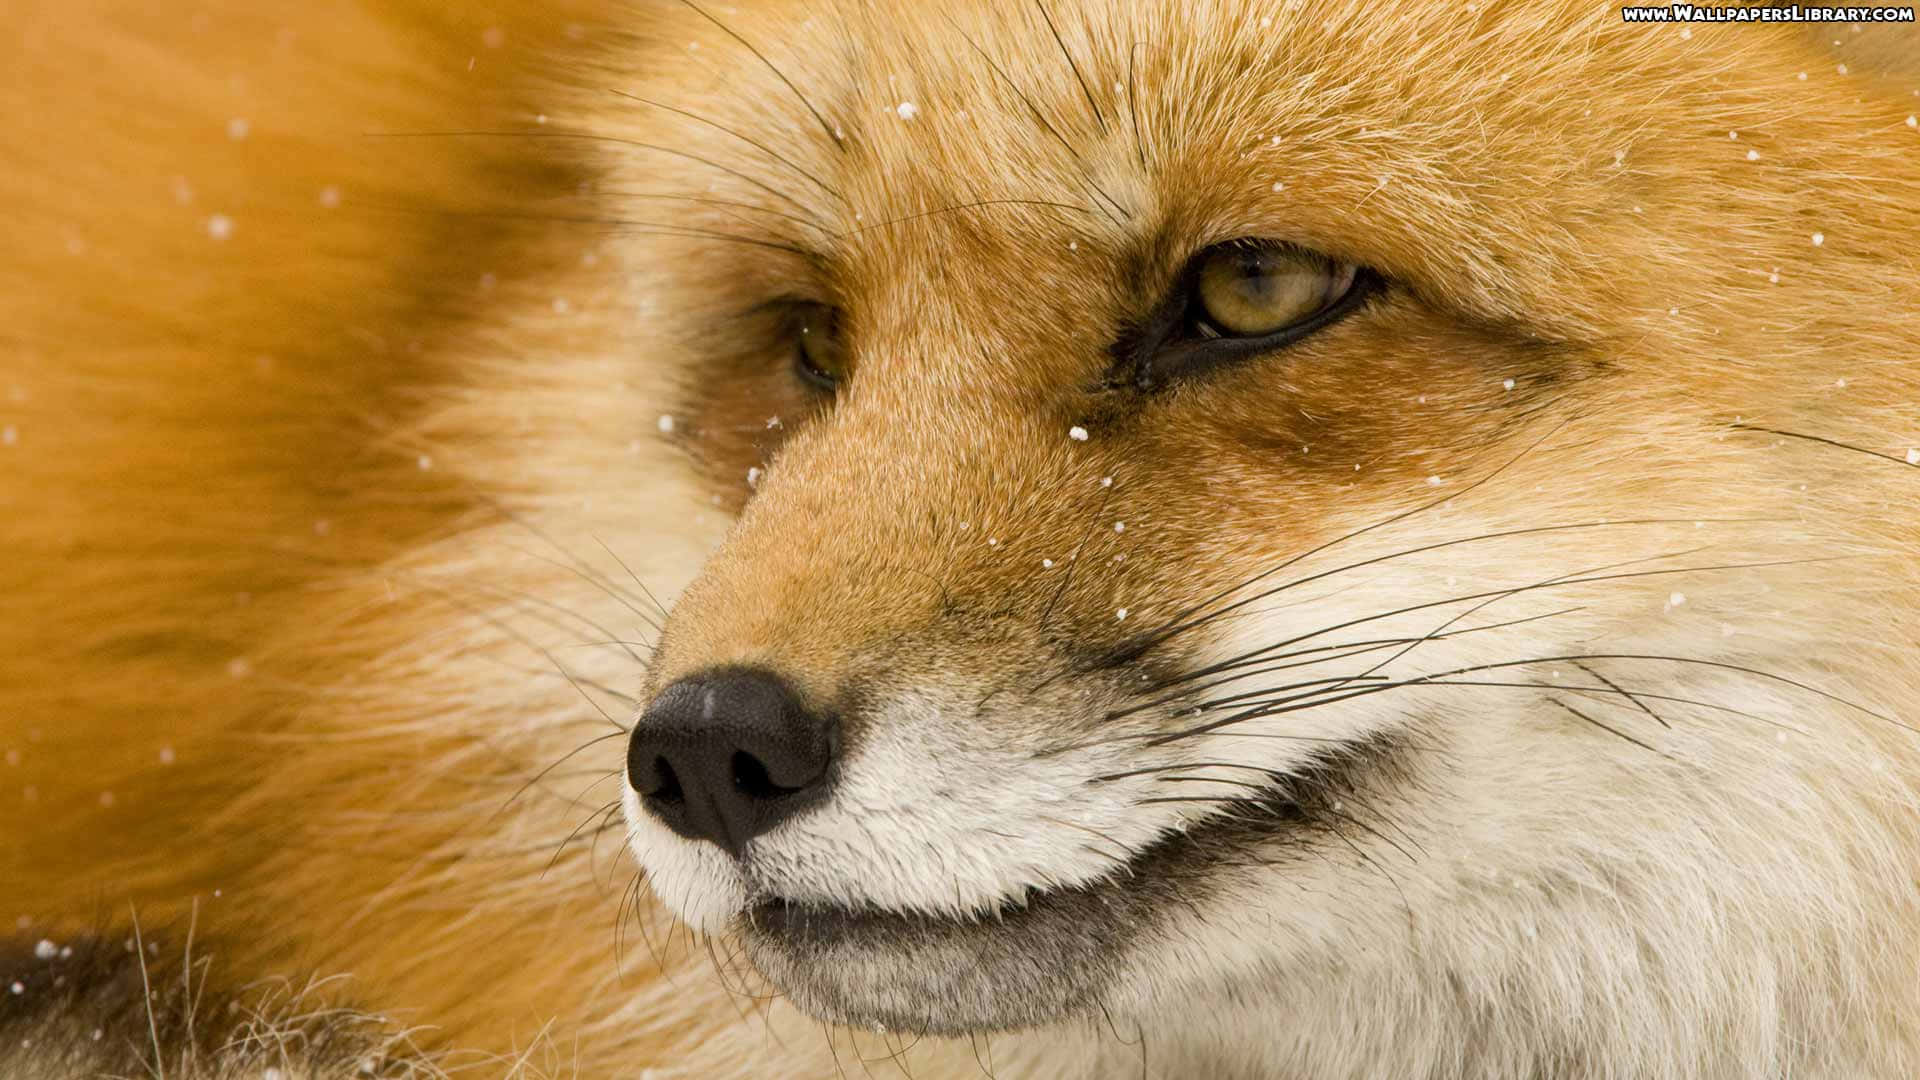 Look Out! This Cool Fox On The Move Wallpaper